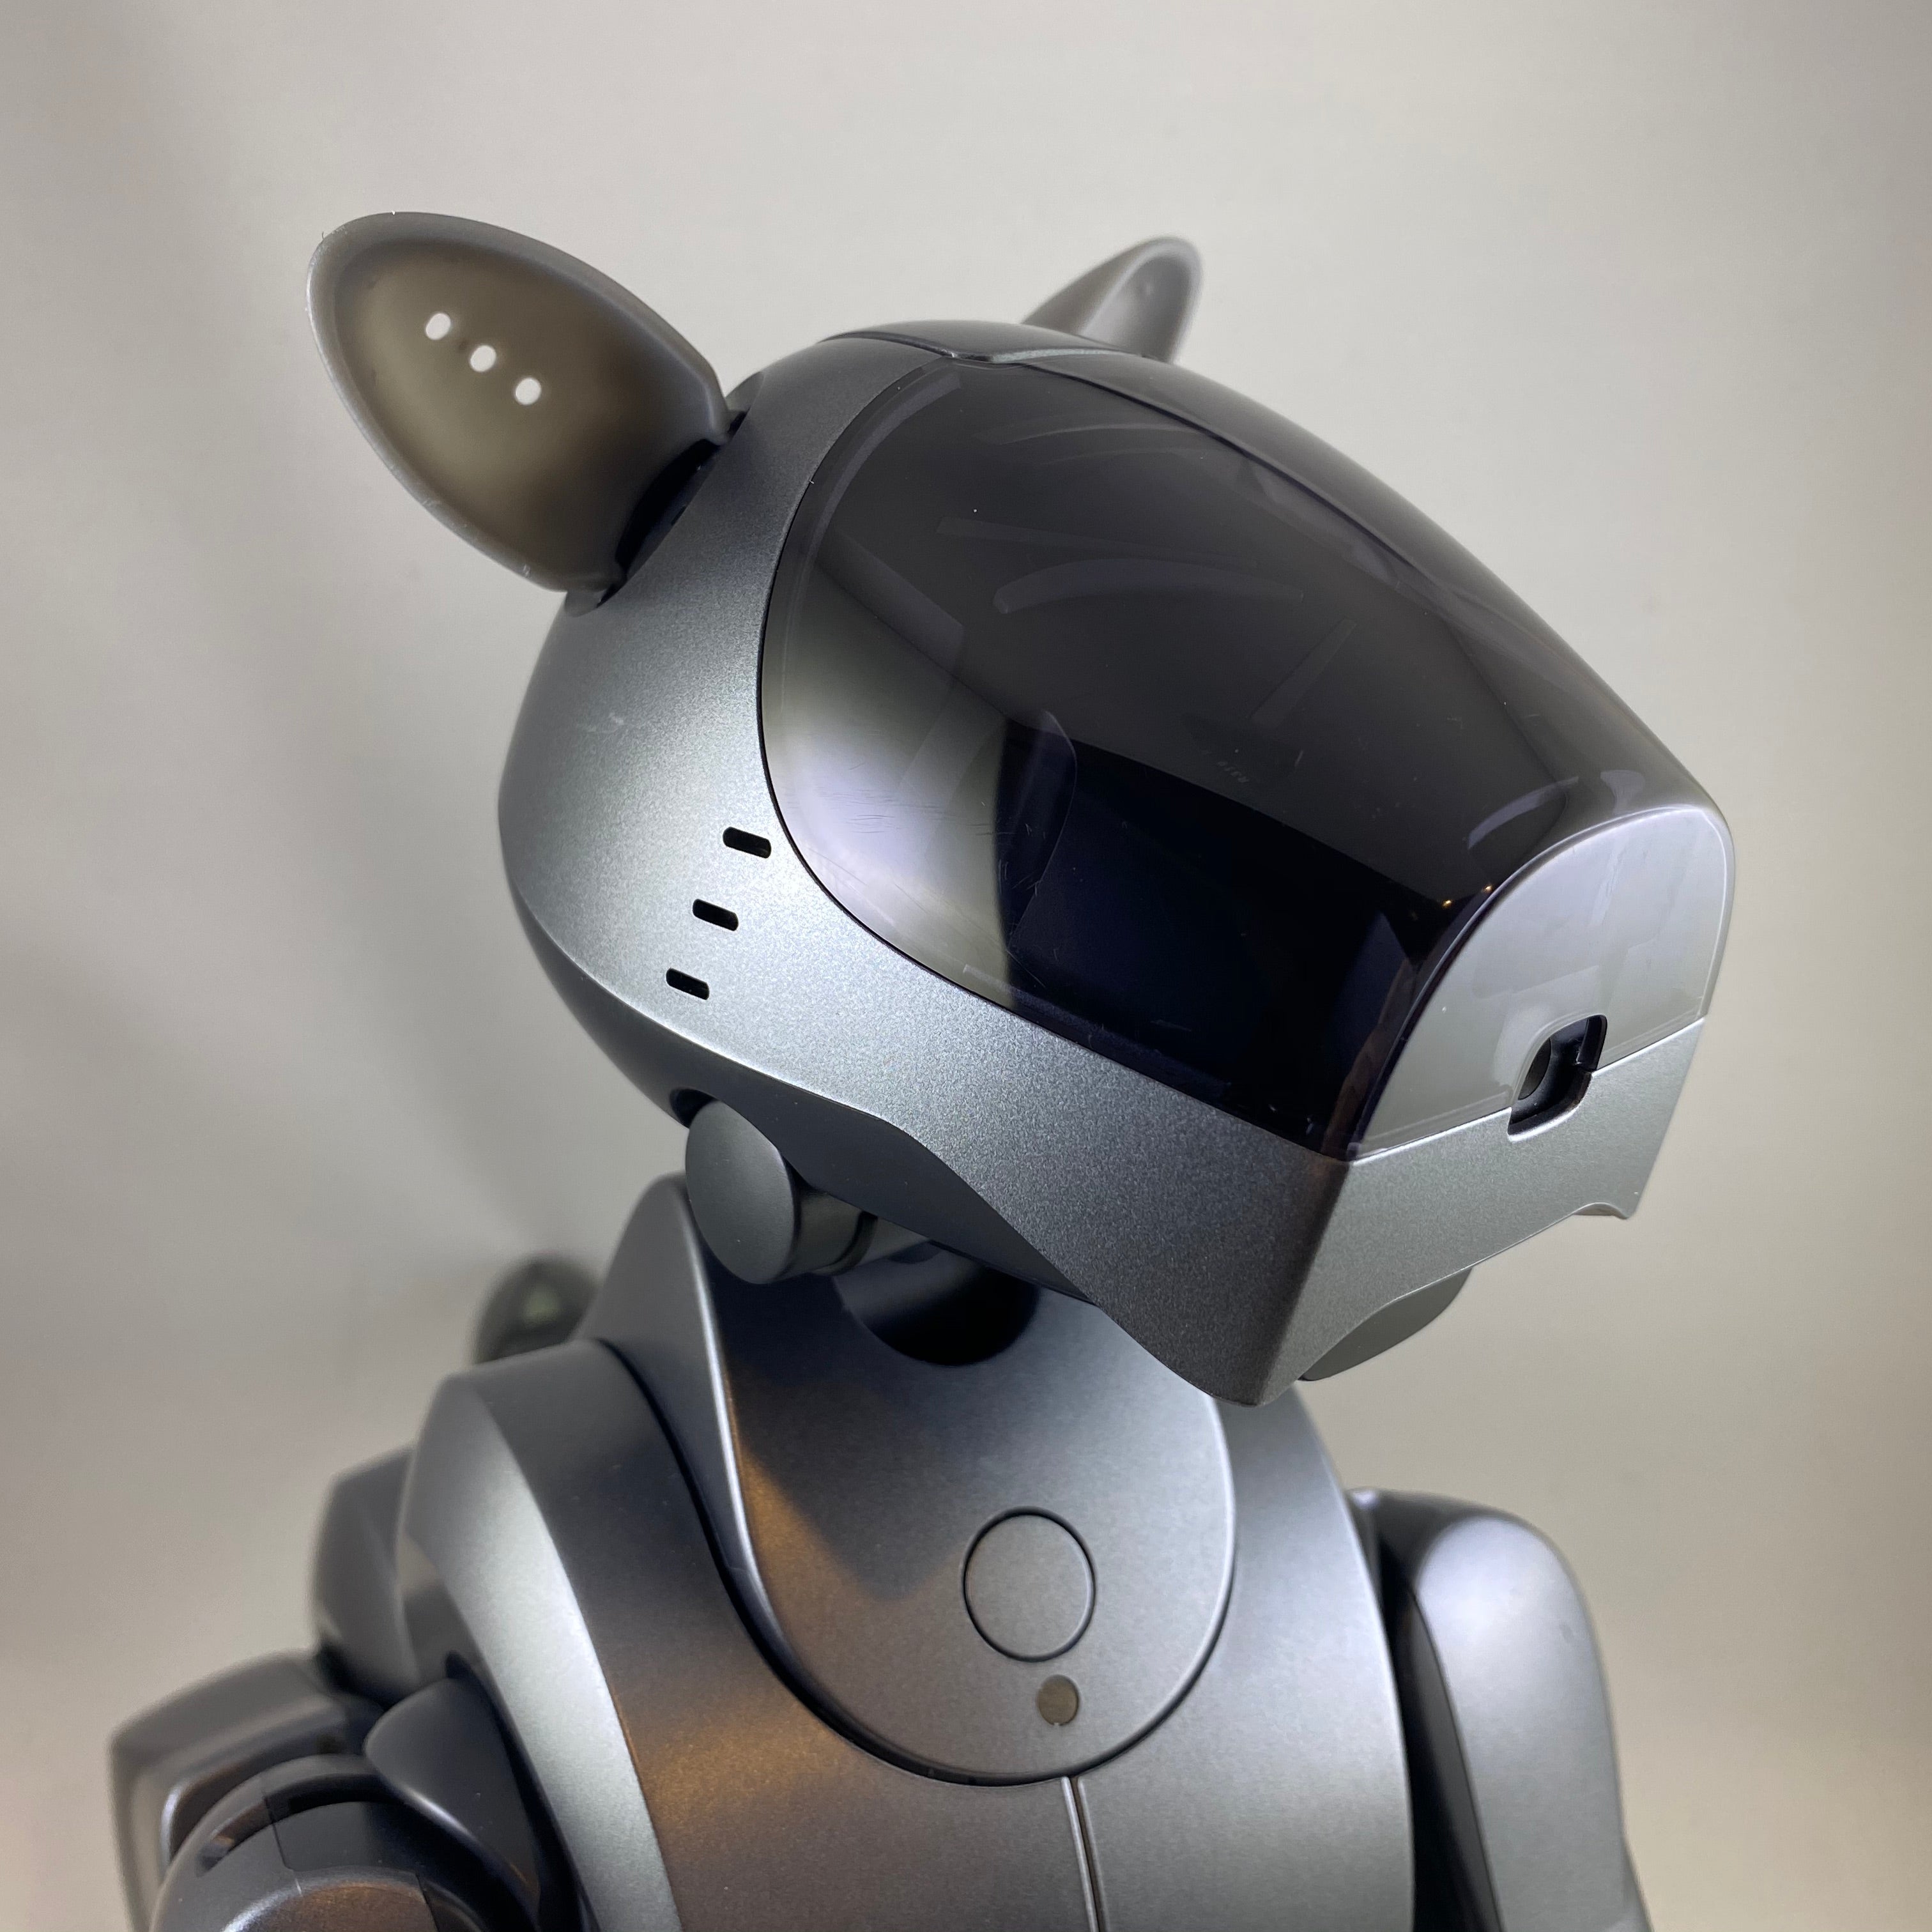 Aibo ERS-210 Ears: 3D Printed – Aibo Accessories